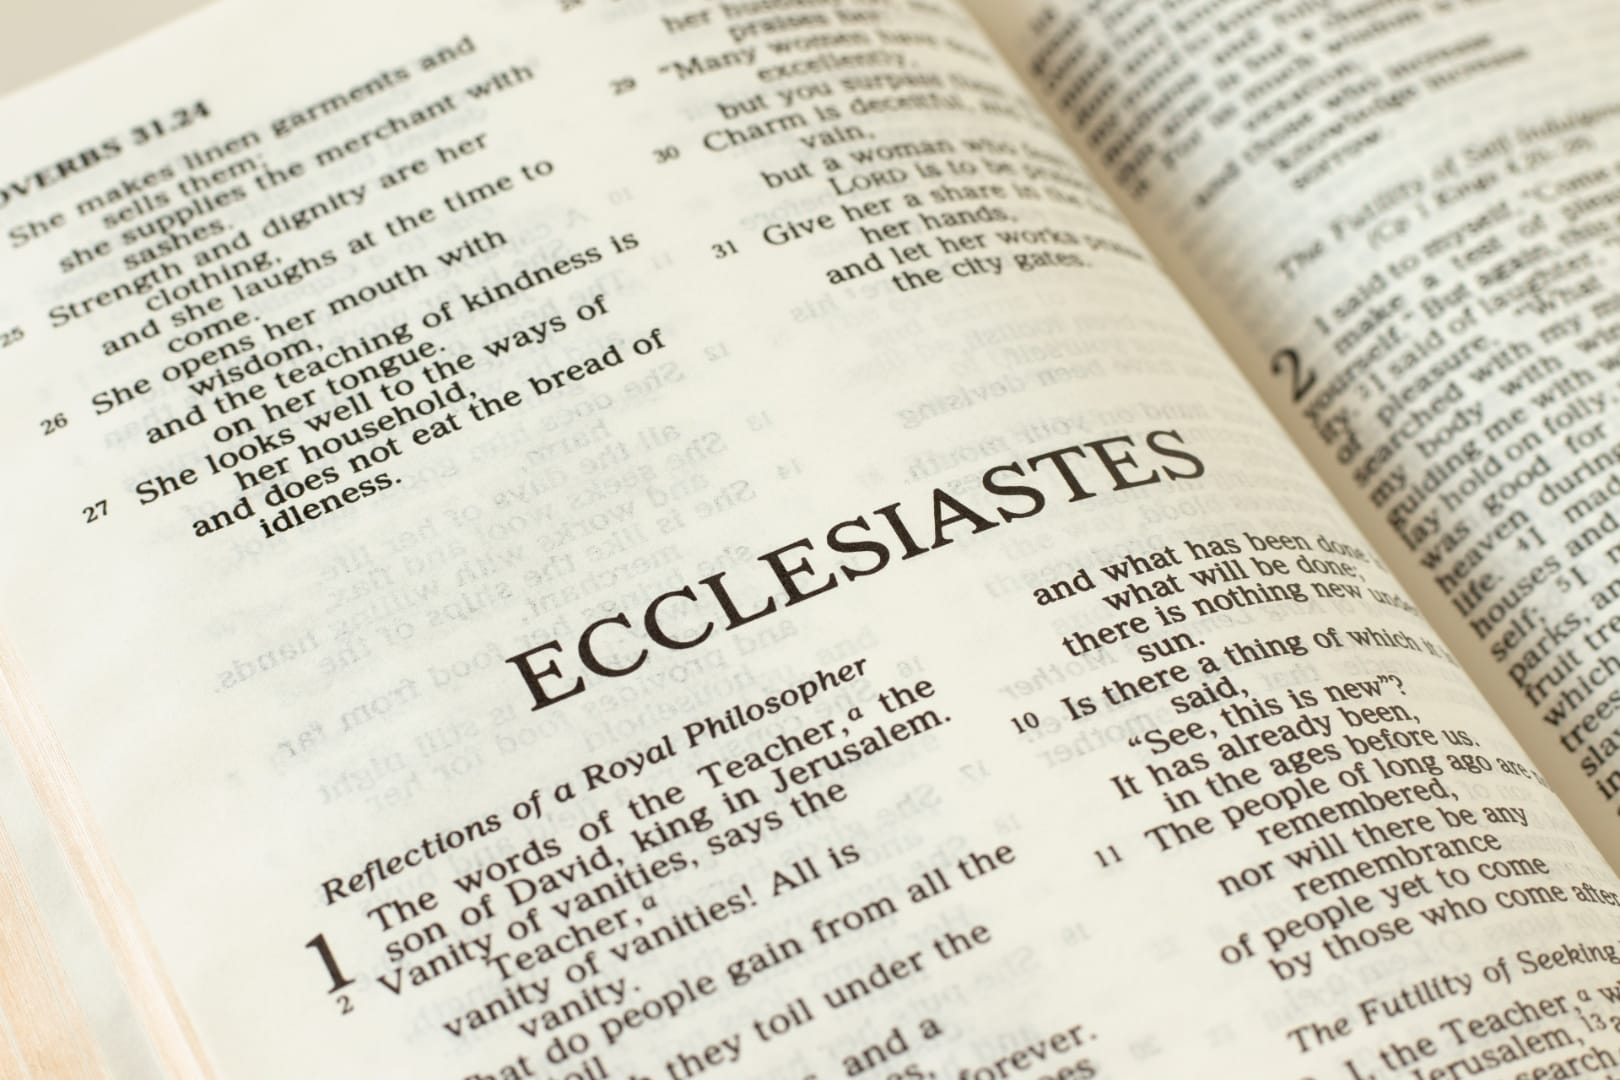 Be Bold and Wise (Ecclesiastes 11:1-6)